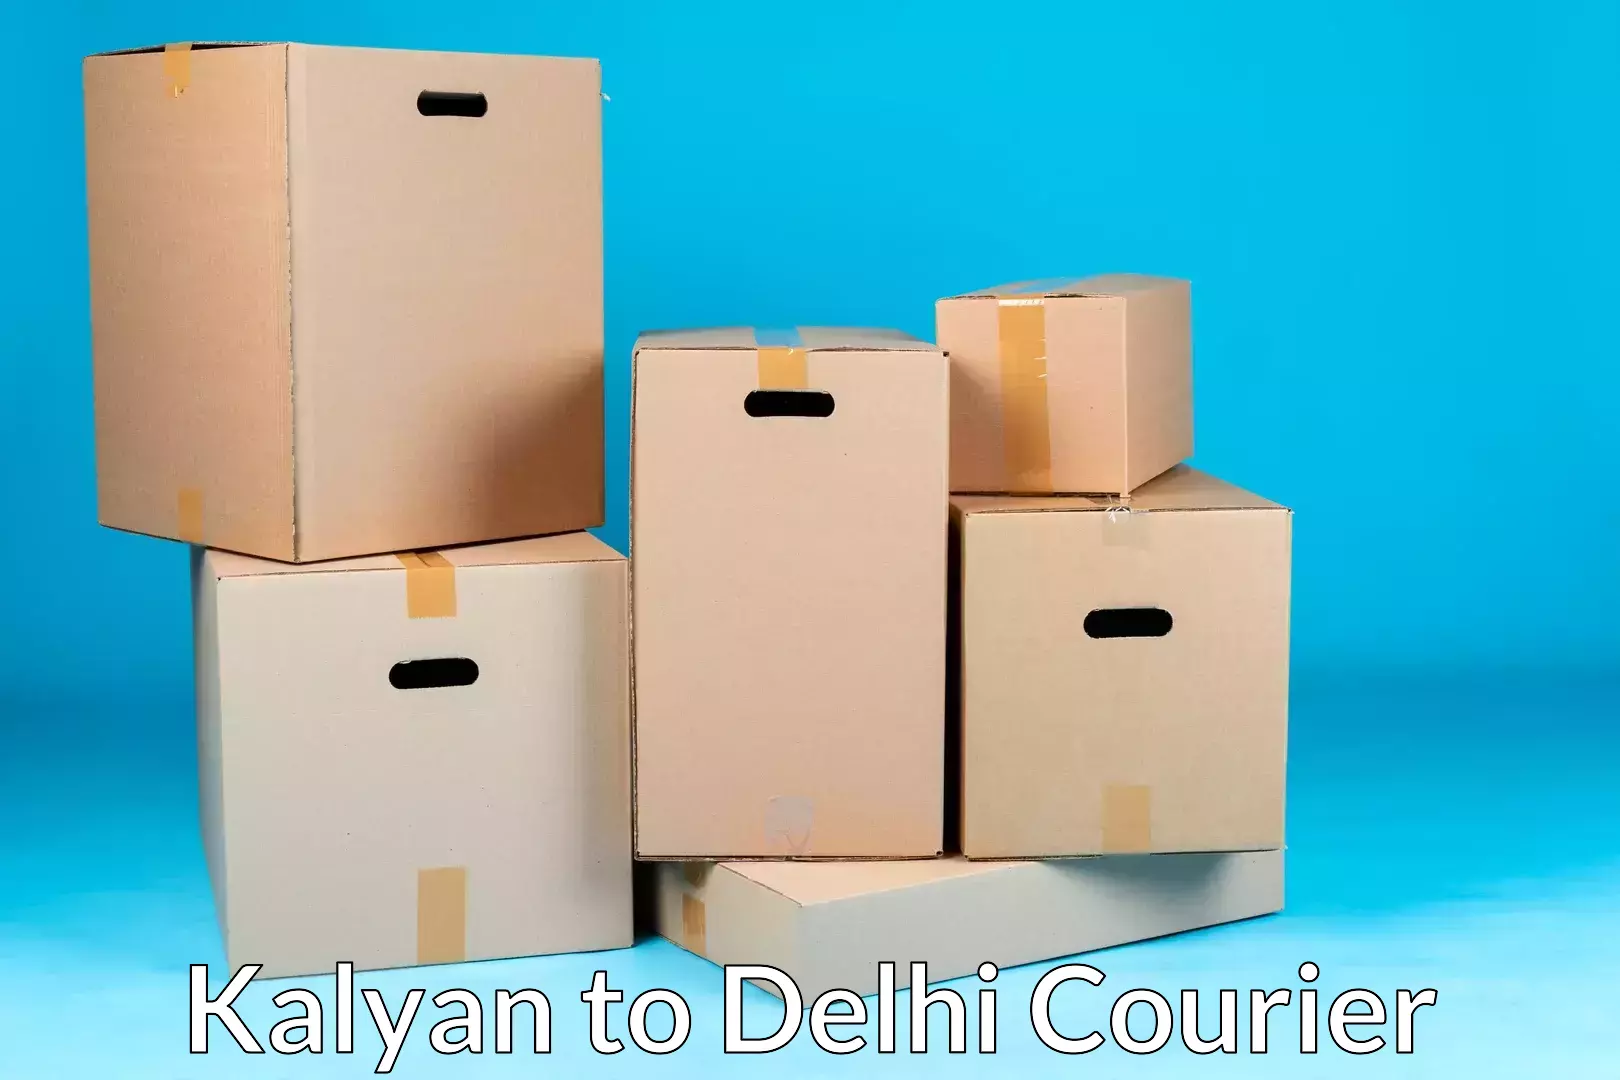 Trusted relocation experts Kalyan to East Delhi